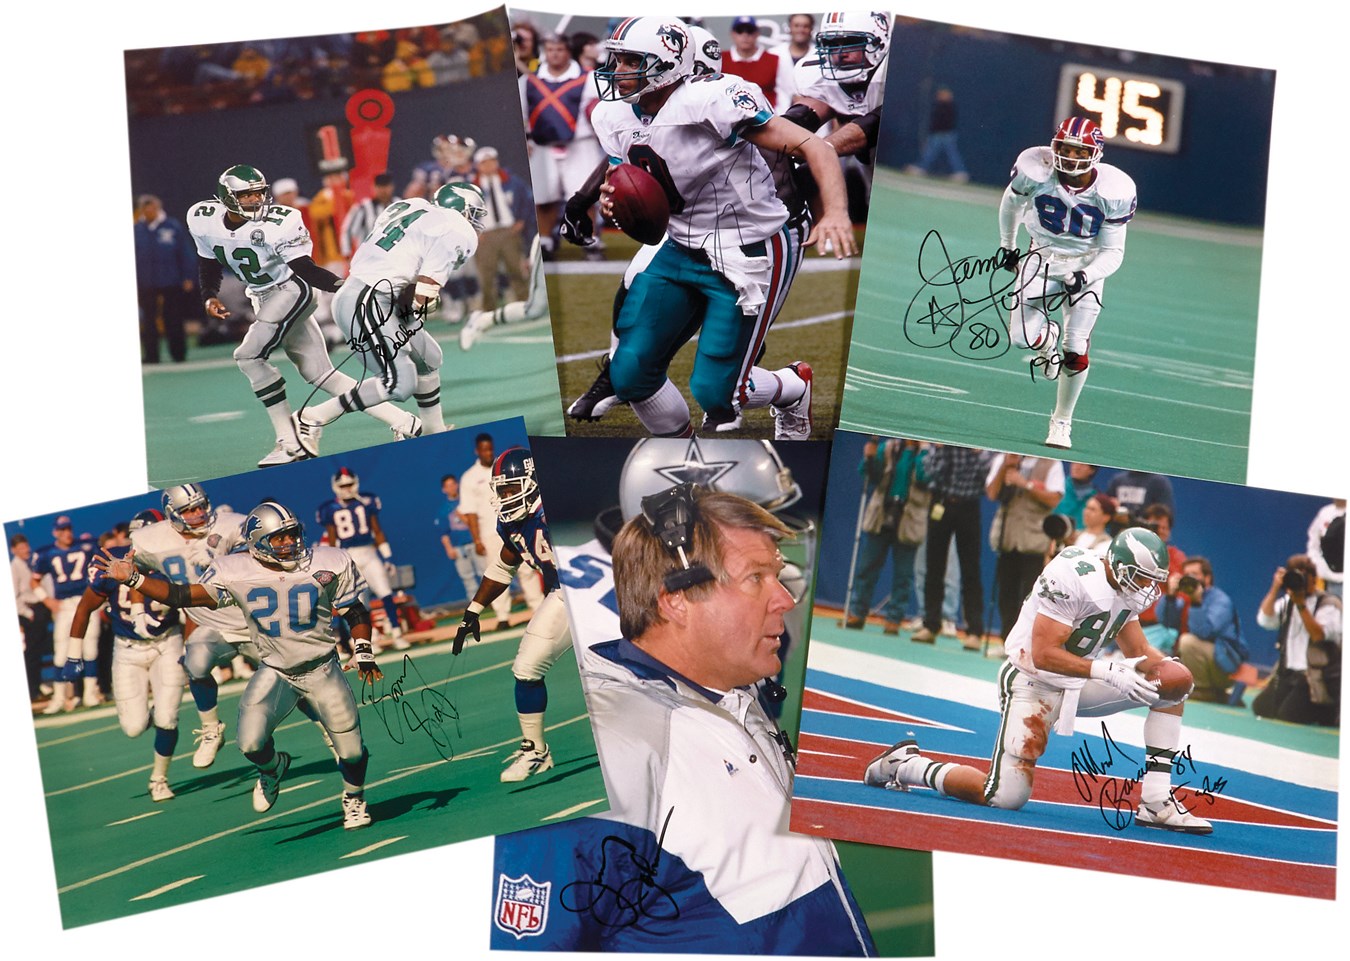 Football - 1980s-90s "Superstars of the NFL" 16x20” In Person Signed Photographs from VIP Photographer Richard Brightly (6)